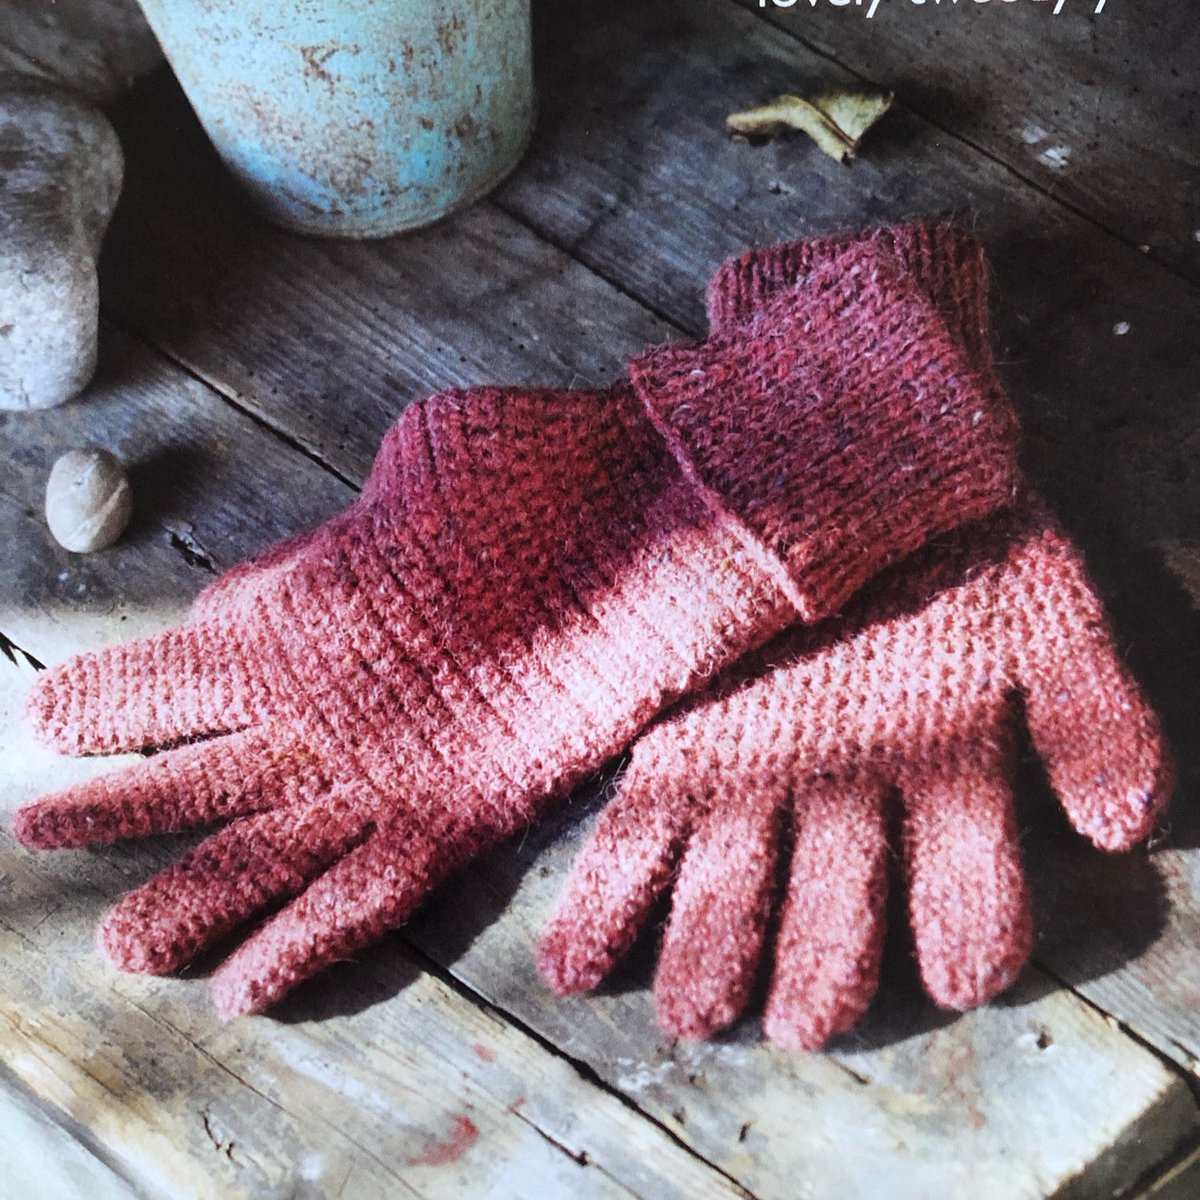 Excited to share this item from my shop: Crochet Tweed Gloves Crochet Pattern #crochet #knitting #crochetgloves #crochet #crochetpattern #crochettweed #tweed #crochetglove #wintergloves #autumngloves etsy.me/3F0T4Mu